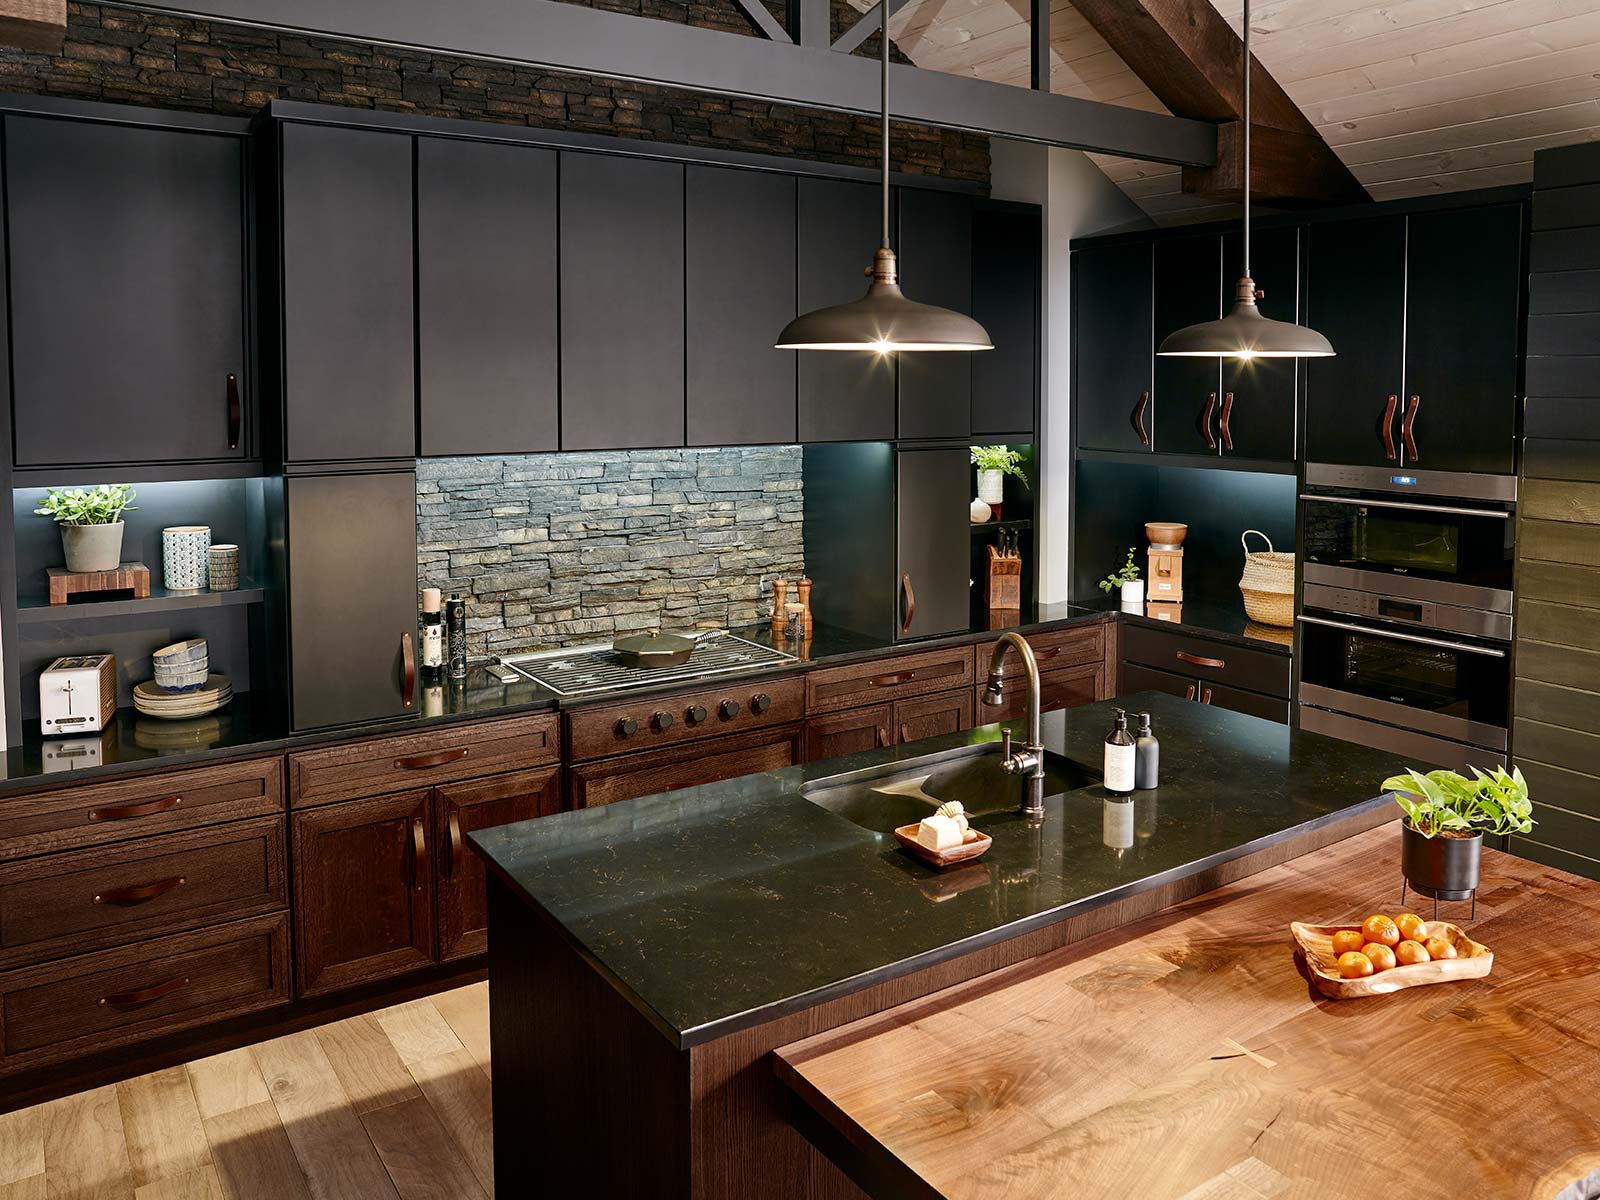 Black and wood cabinets